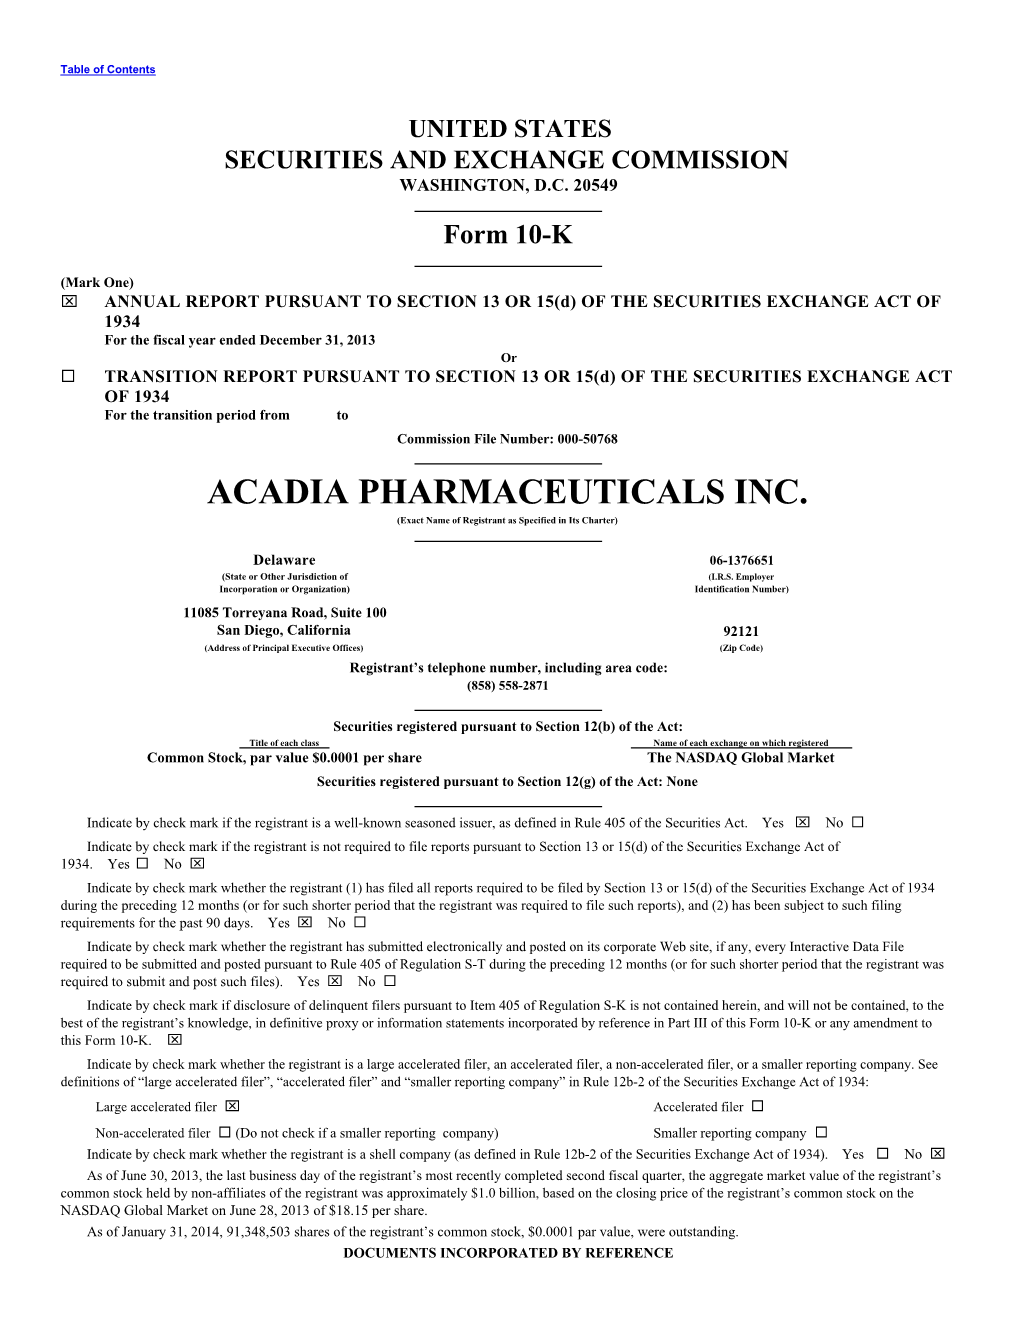 ACADIA PHARMACEUTICALS INC. (Exact Name of Registrant As Specified in Its Charter)